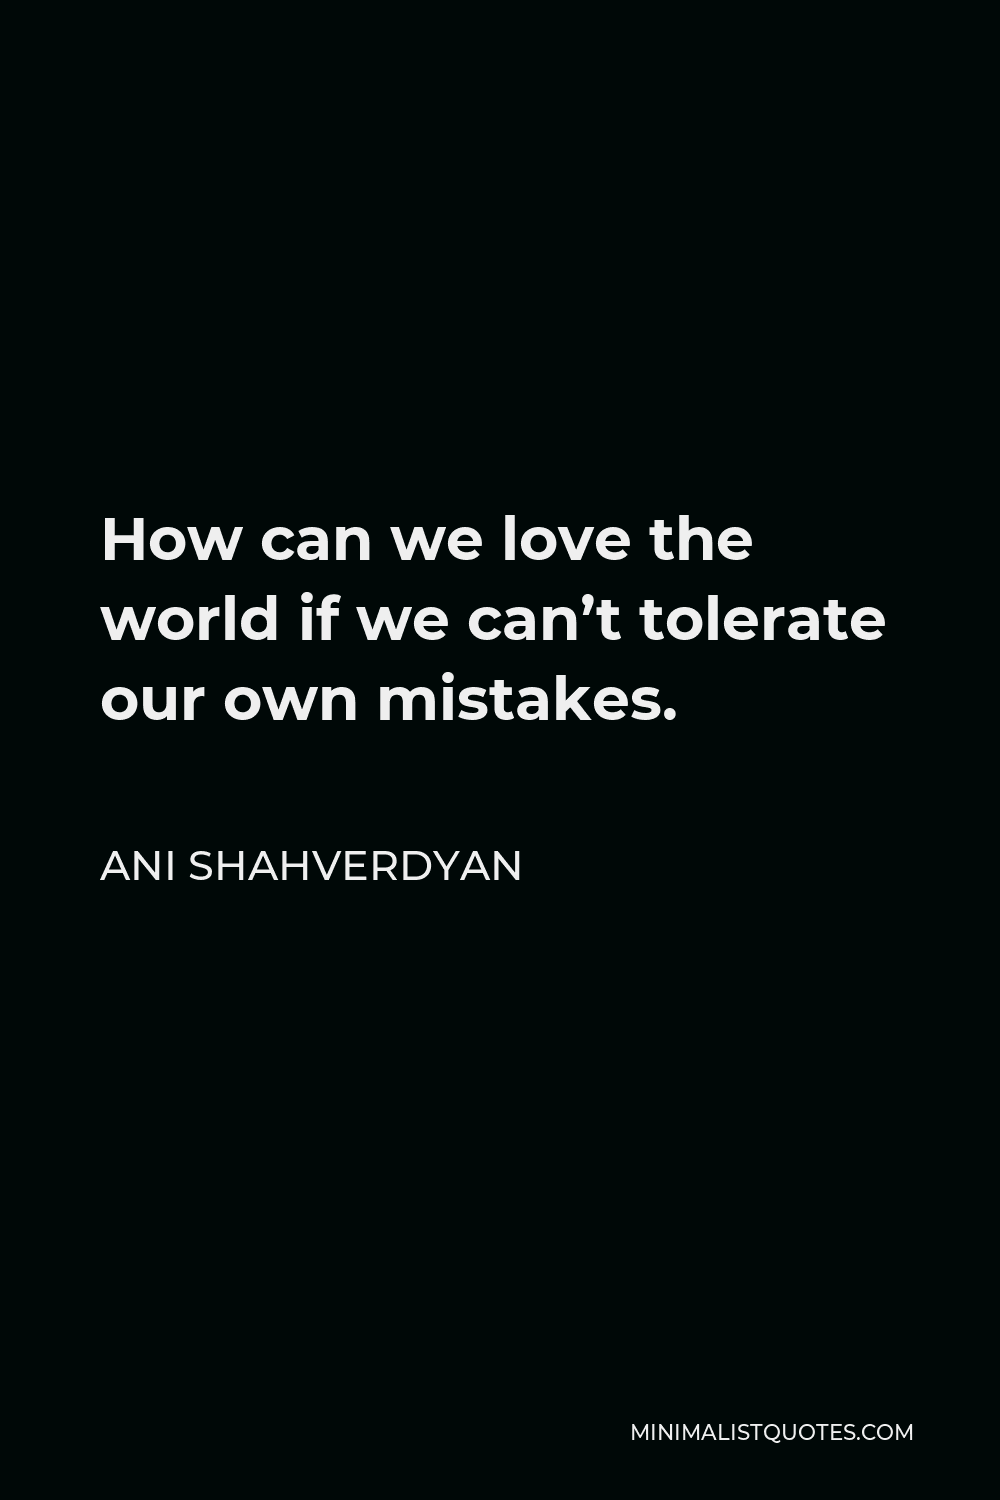 Ani Shahverdyan Quote - How can we love the world if we can’t tolerate our own mistakes.